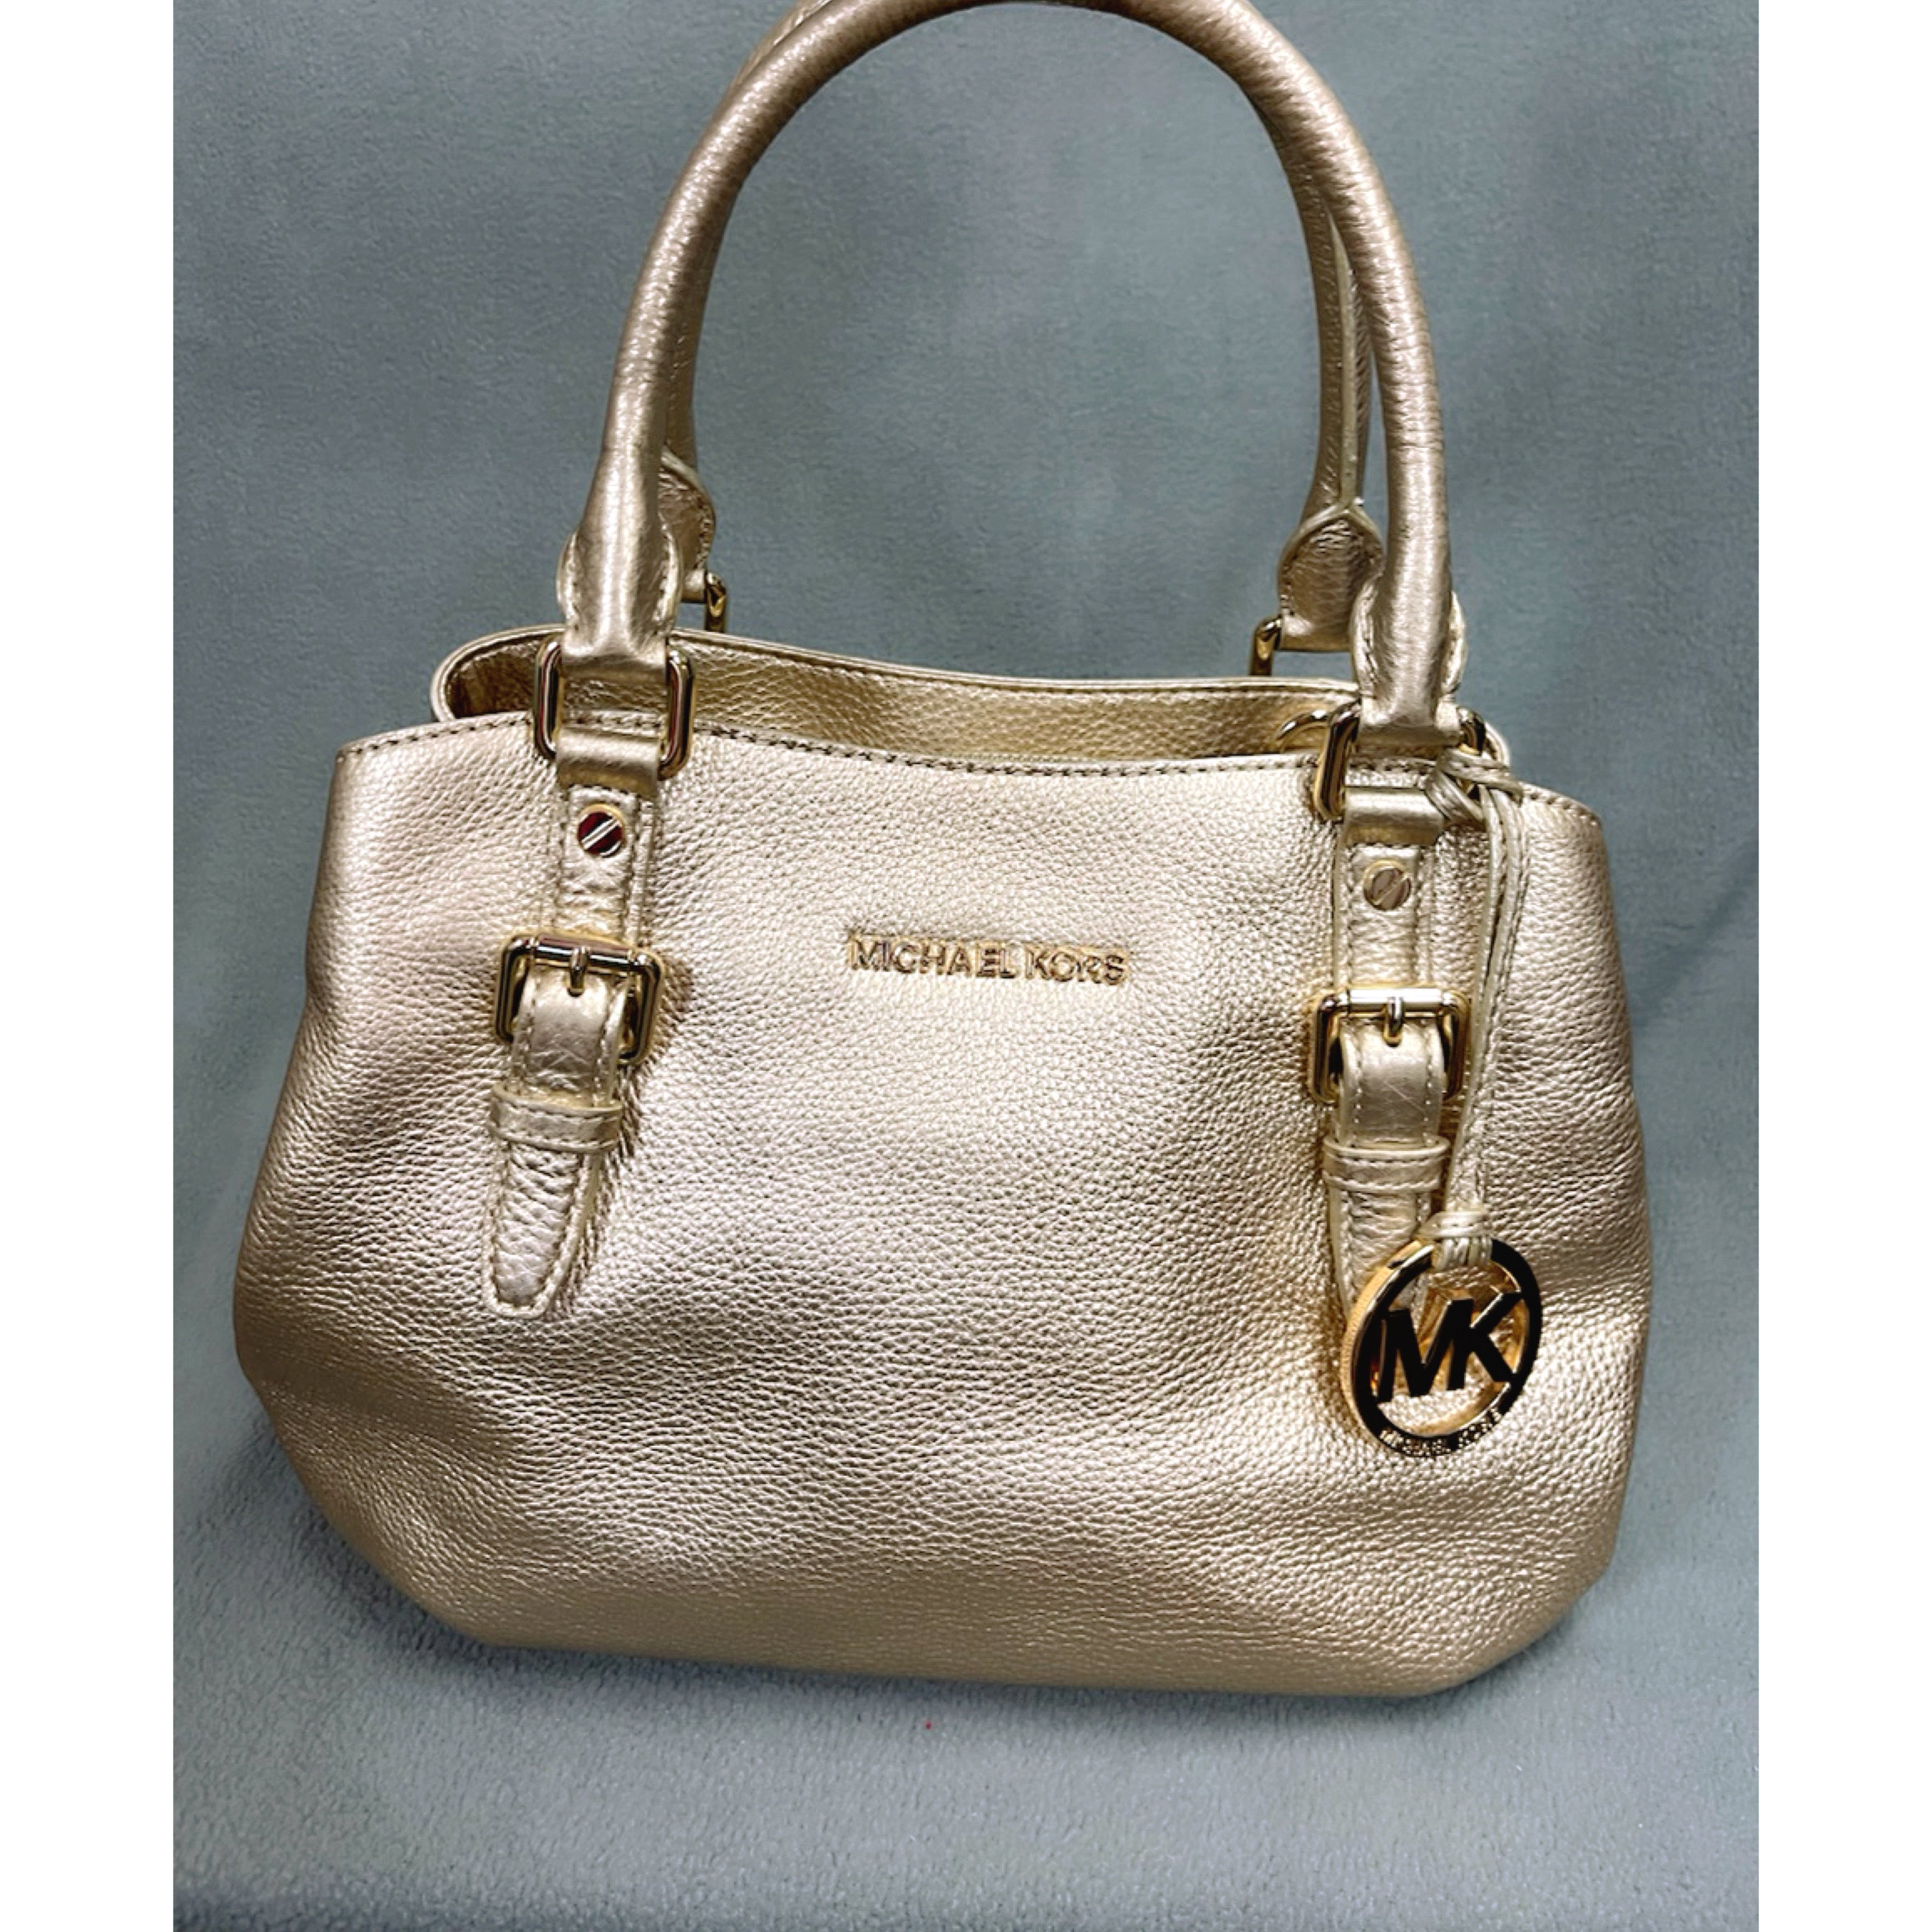 Michael Kors gold leather bag, NEW without tags